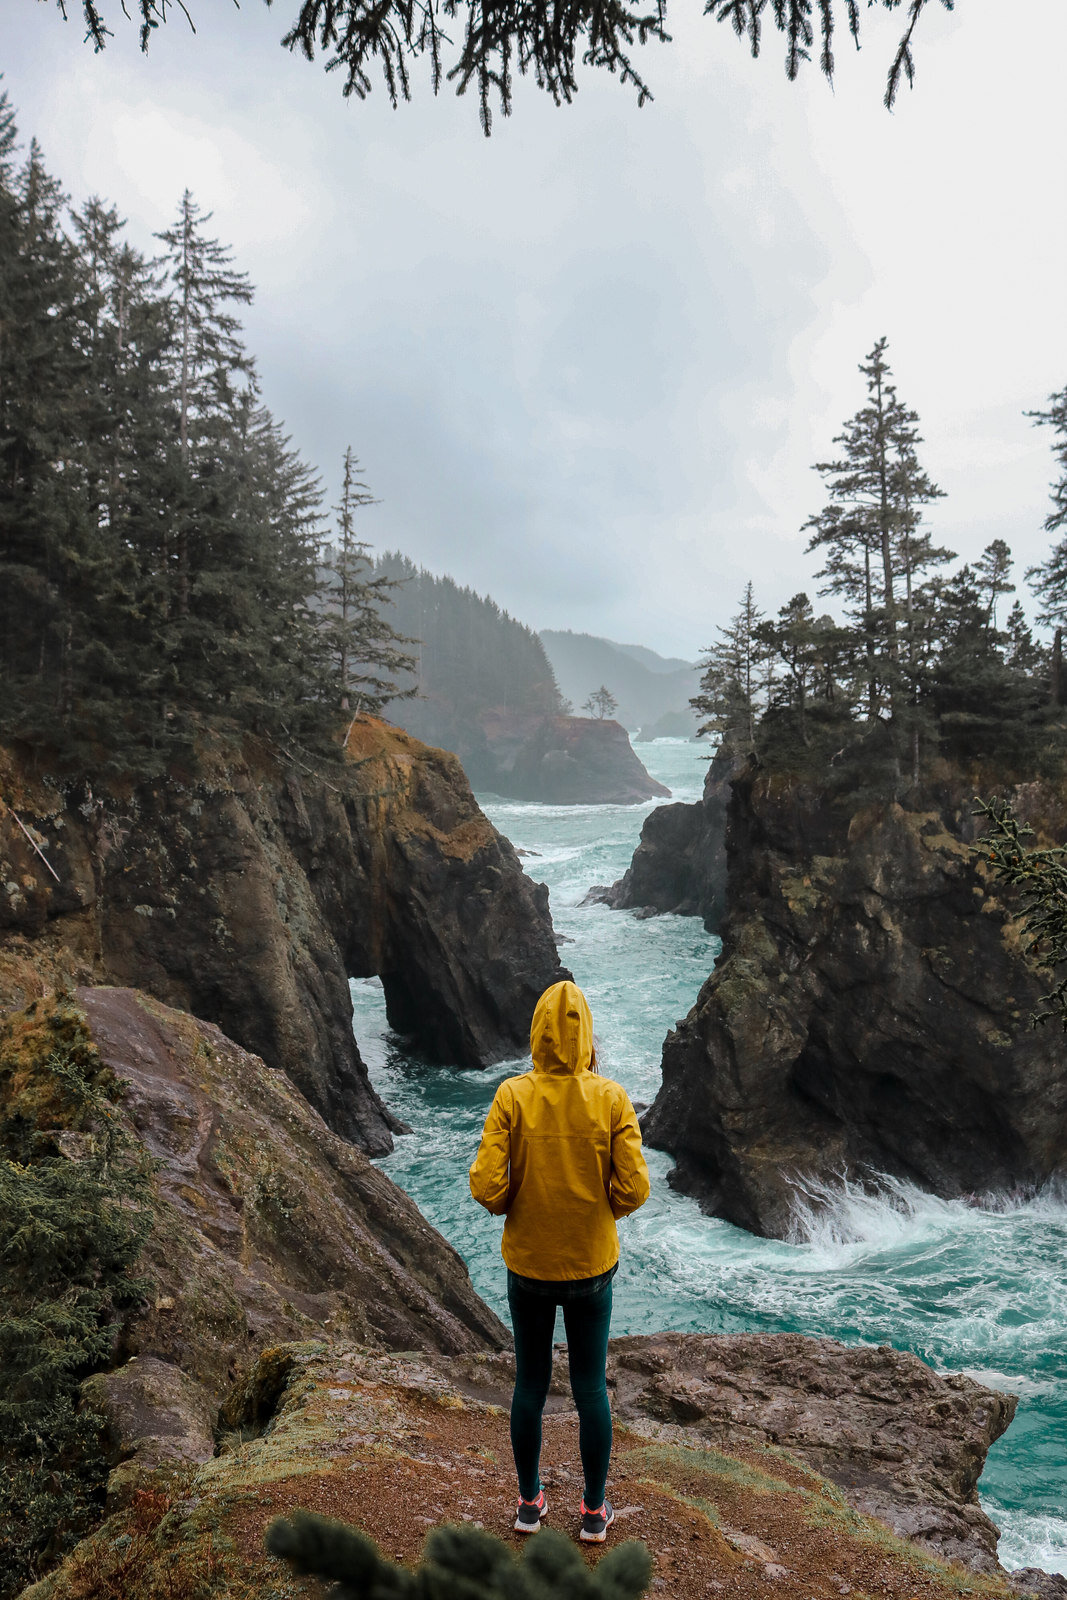 Girl in a yellow jacket looking across a stormy coastal view with turquoise rough ocean waves and dark cliffs covered in mist and green trees,Samuel H Boardman Scenic State Corridor, Oregon Coast